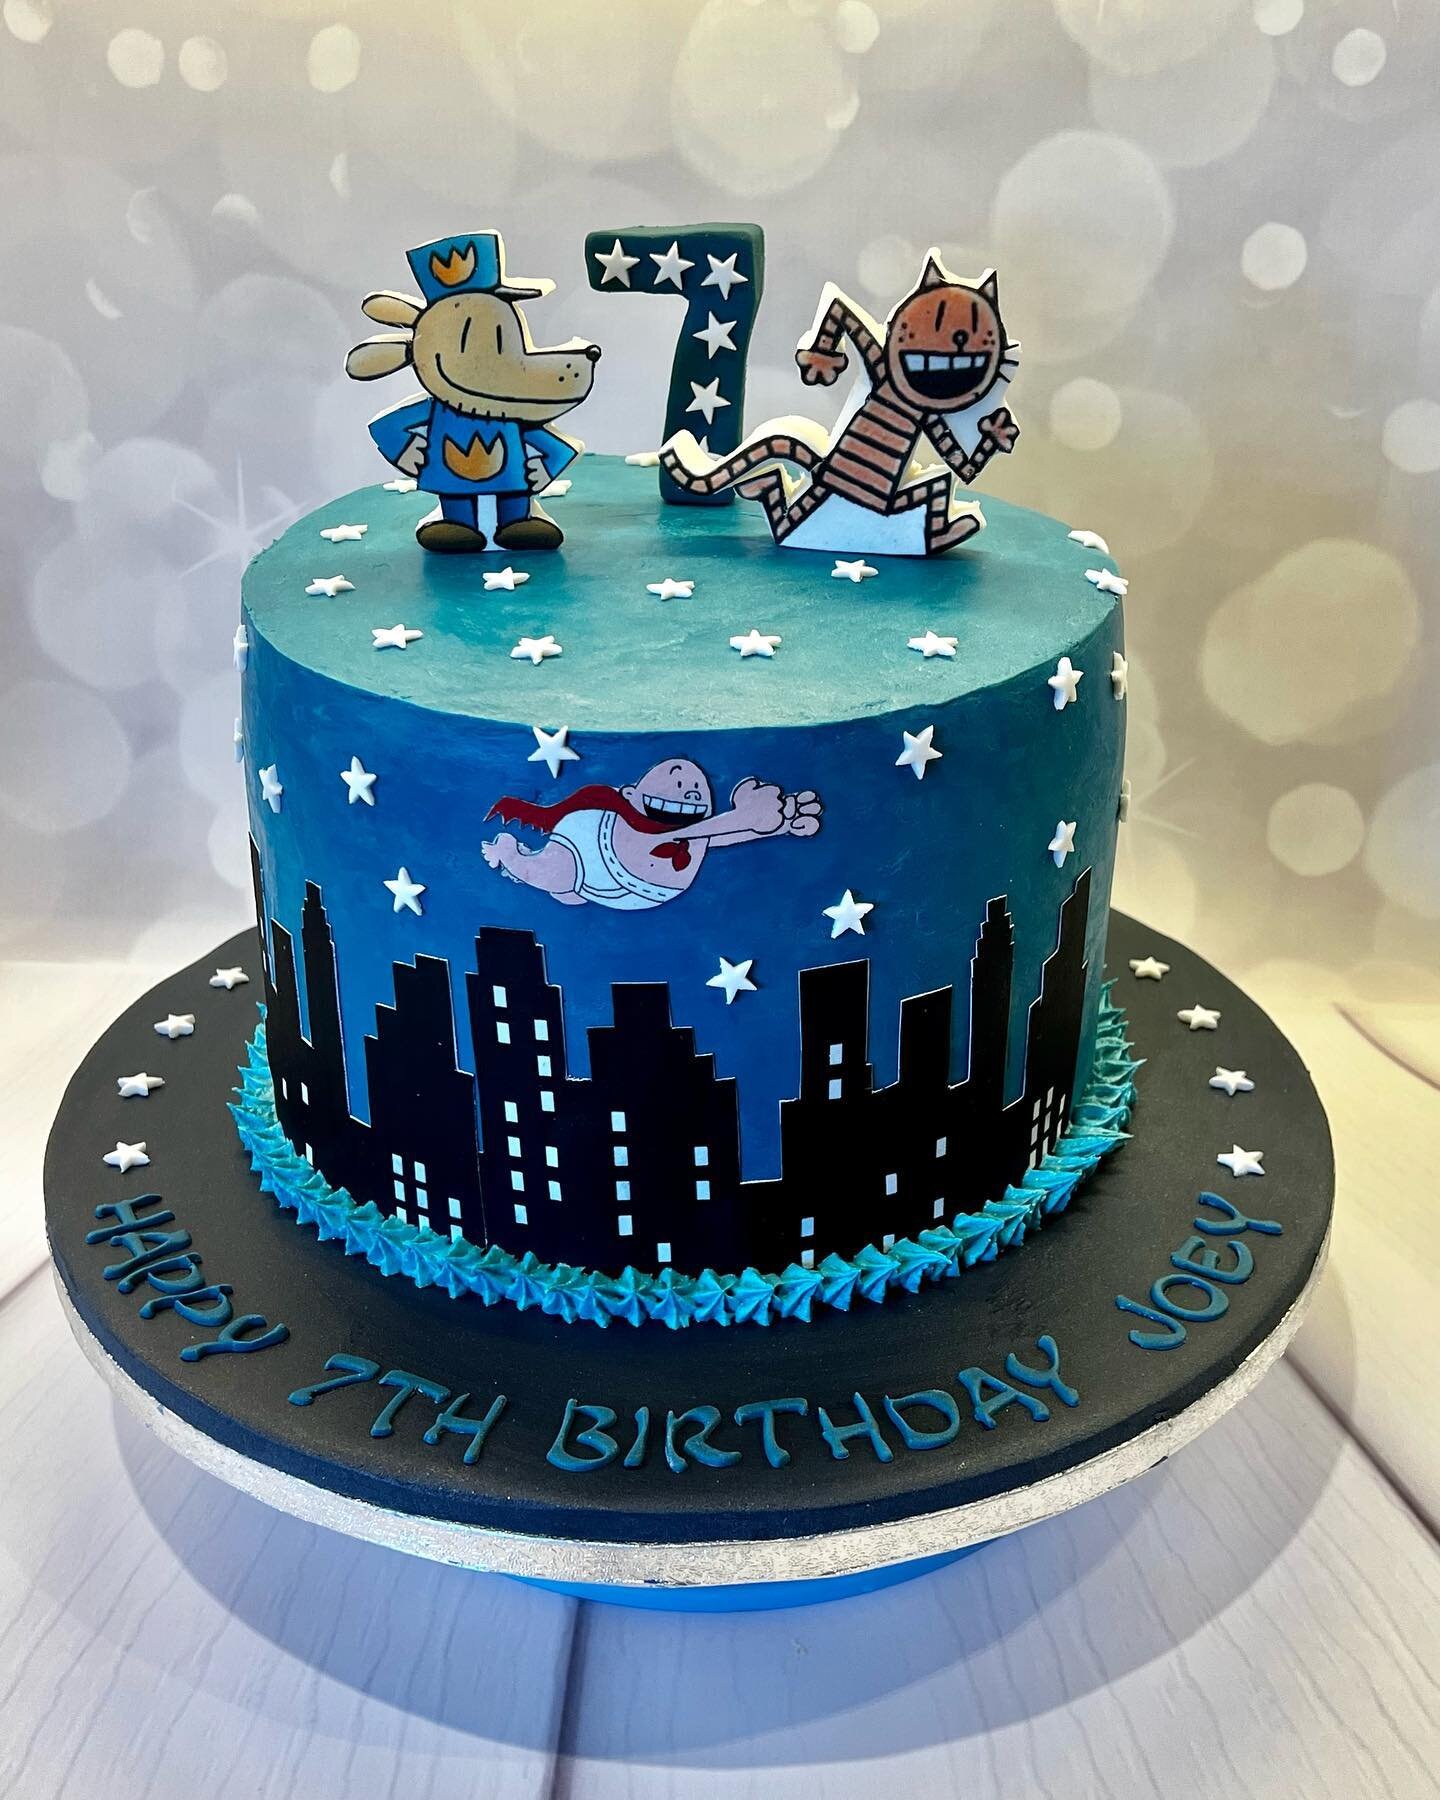 Joey had a Dog man, Cat kid and Captain Underpants style cake for his 7th Birthday.  Vanilla sponge with chocolate ganache was the choice for this cake.  Happy Birthday Joey.  Hope you had a great birthday. Xx